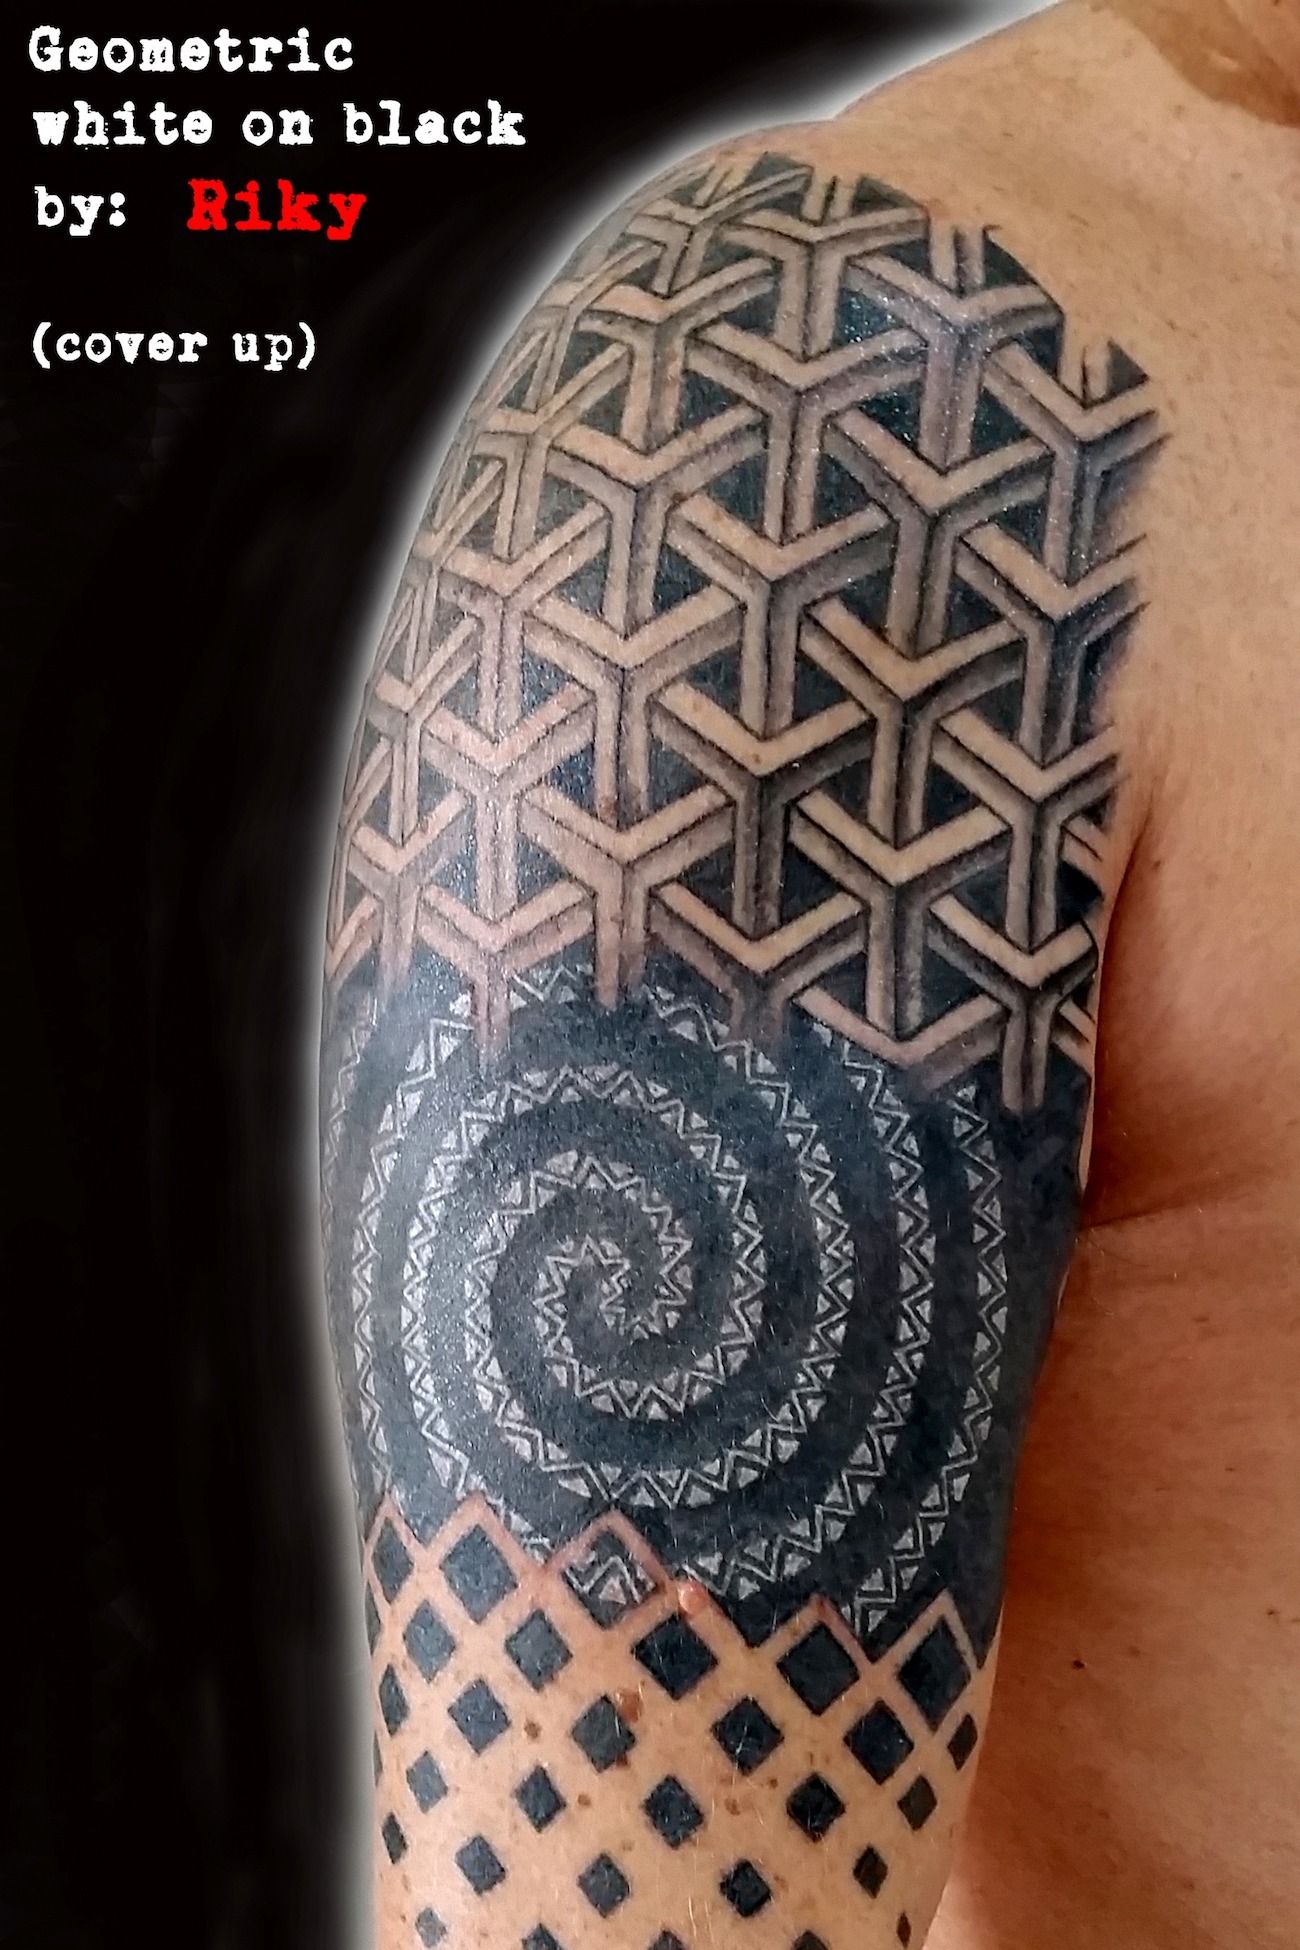 Aggregate 75+ geometric cover up tattoos best